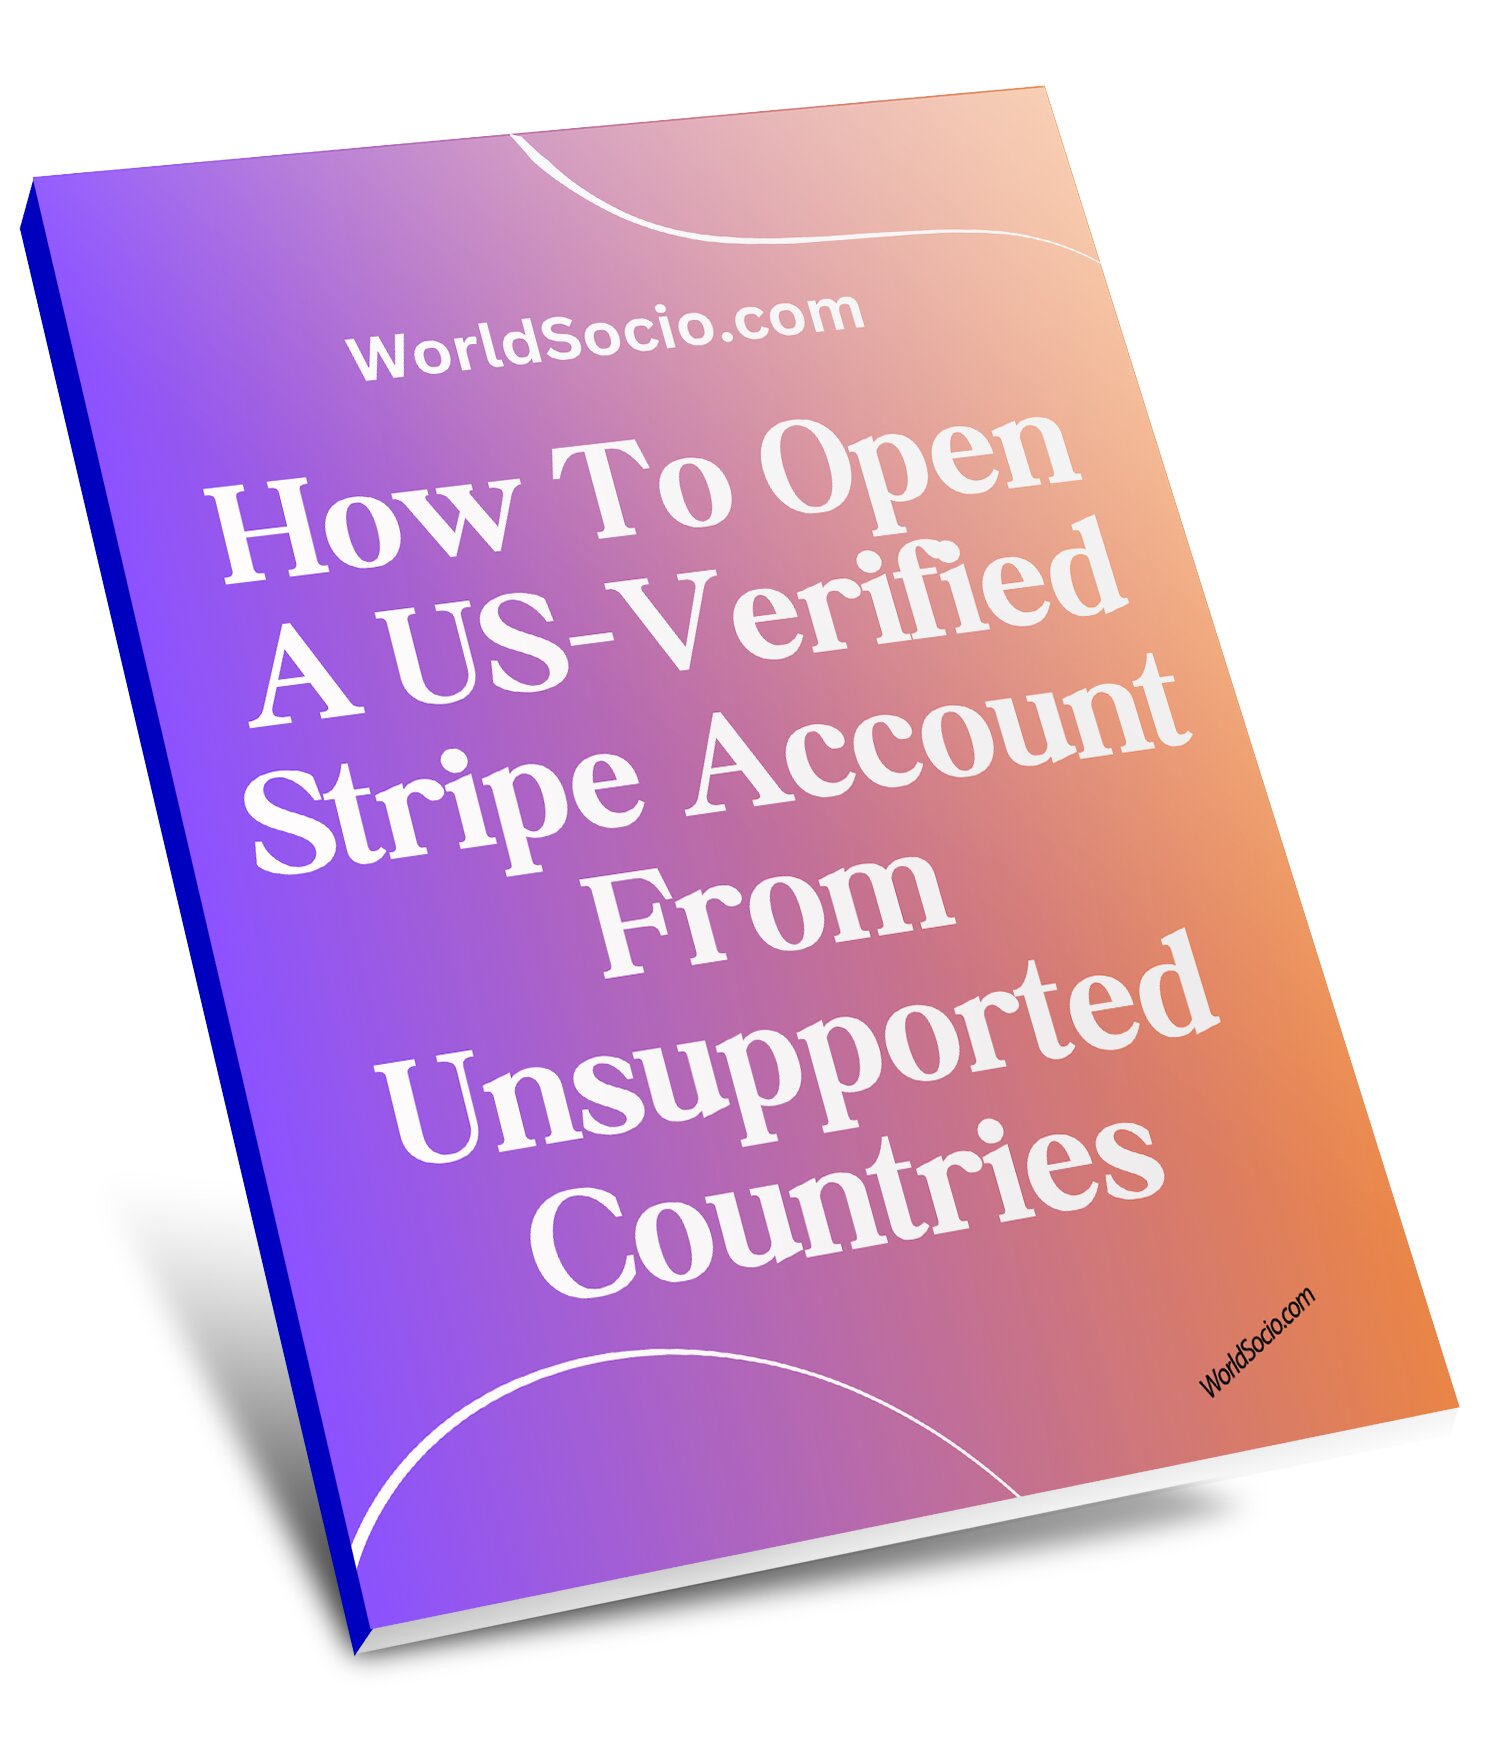 how-to-open-a-us-verified-stripe-account-from-unsupported-countries-jpg.1454